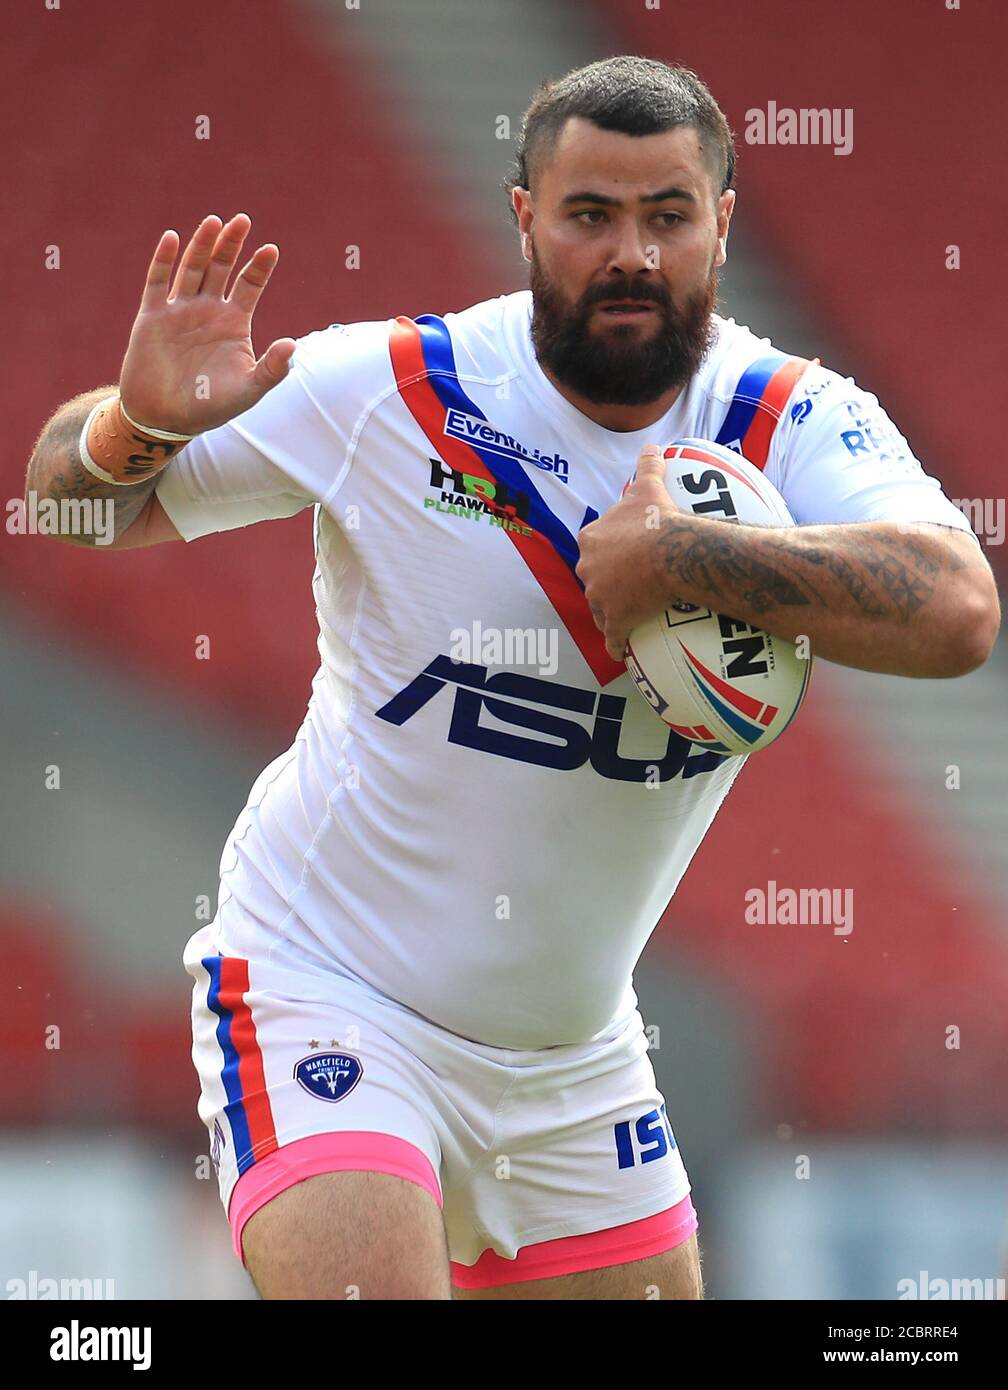 wakefield-trinitys-david-fifita-during-the-betfred-super-league-match-at-the-totally-wicked-stadium-st-helens-2CBRRE4.jpg